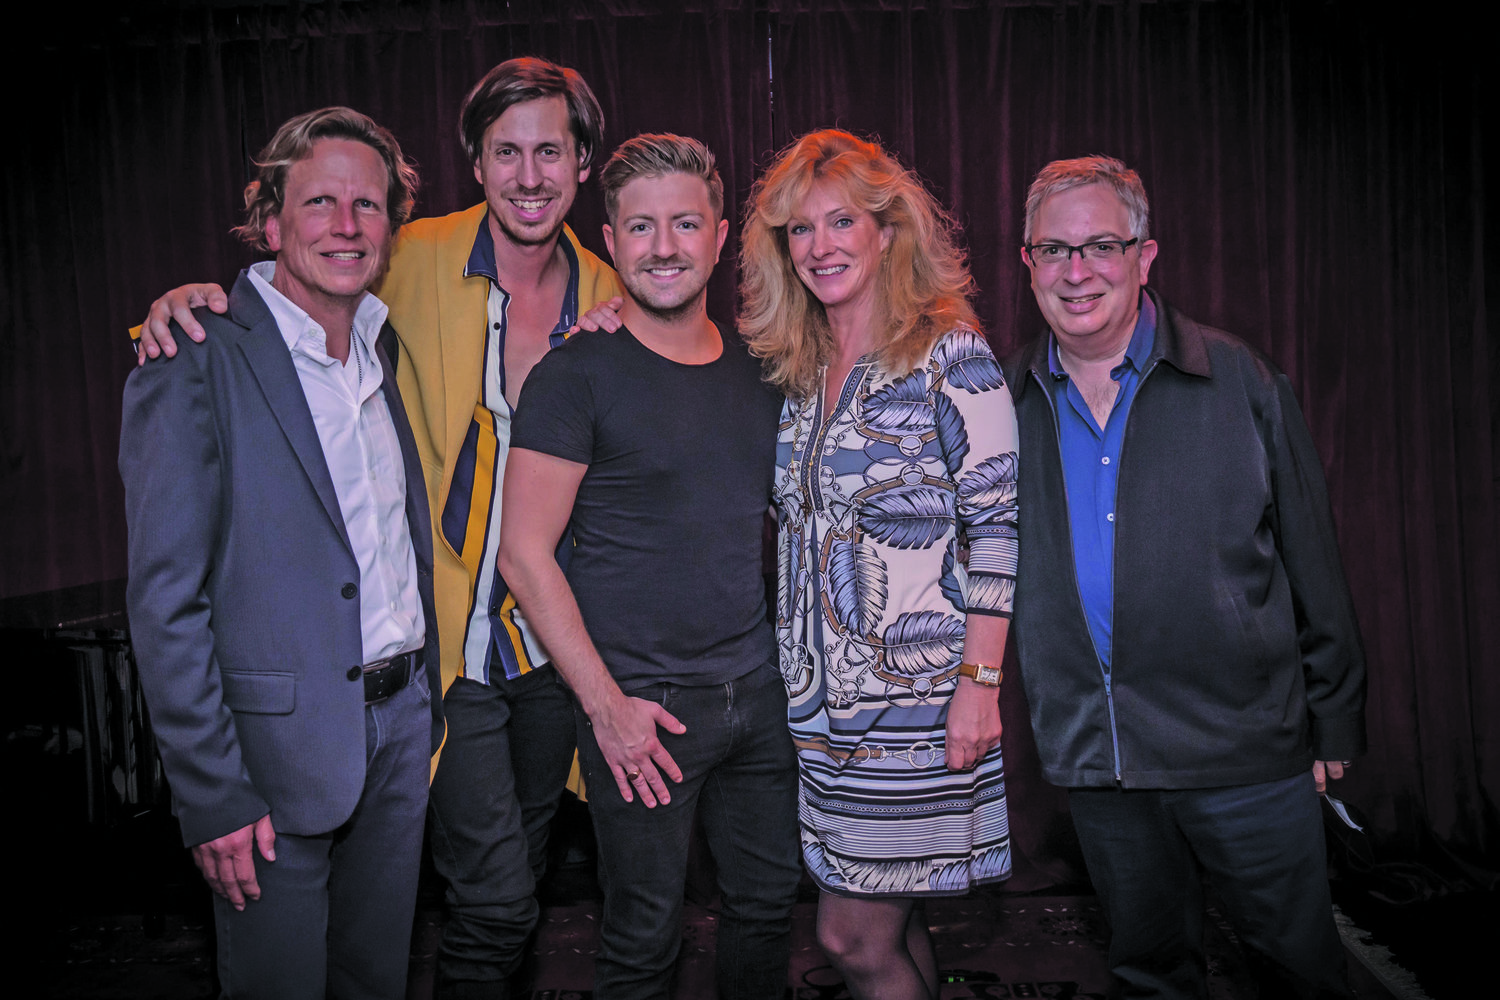 From left are Robert Kotonly, vice president - The RRazz Room Presents; Drew Wutke, musical director; Billy Gilman; Jayne Herbert from The Centre Bridge Inn; Rory Paull, president - The RRazz Room Presents.